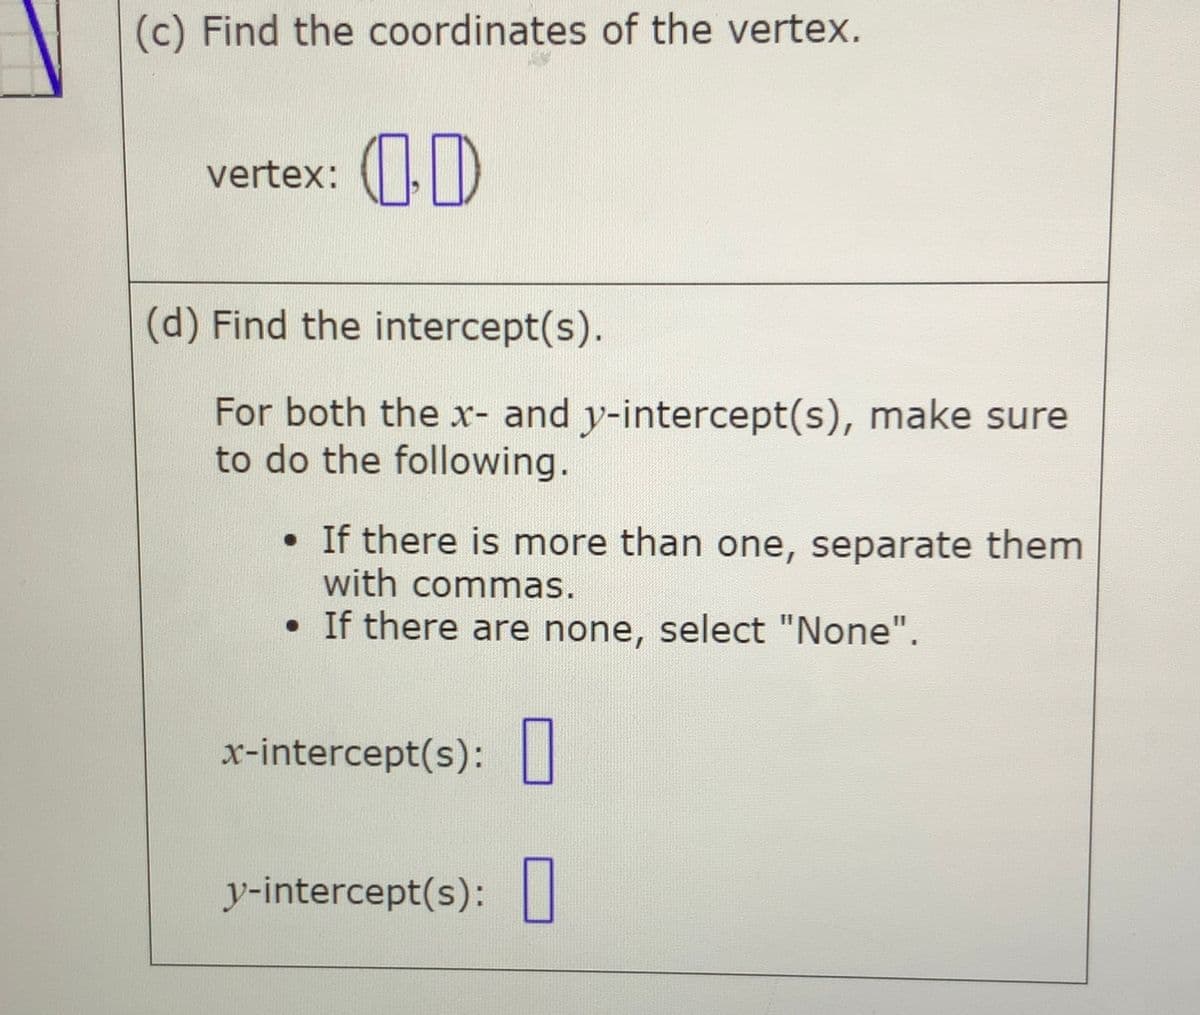 (c) Find the coordinates of the vertex.
vertex: (|D
(d) Find the intercept(s).
For both the x- and y-intercept(s), make sure
to do the following.
• If there is more than one, separate them
with commas.
• If there are none, select "None".
x-intercept(s): ||
y-intercept(s):||
